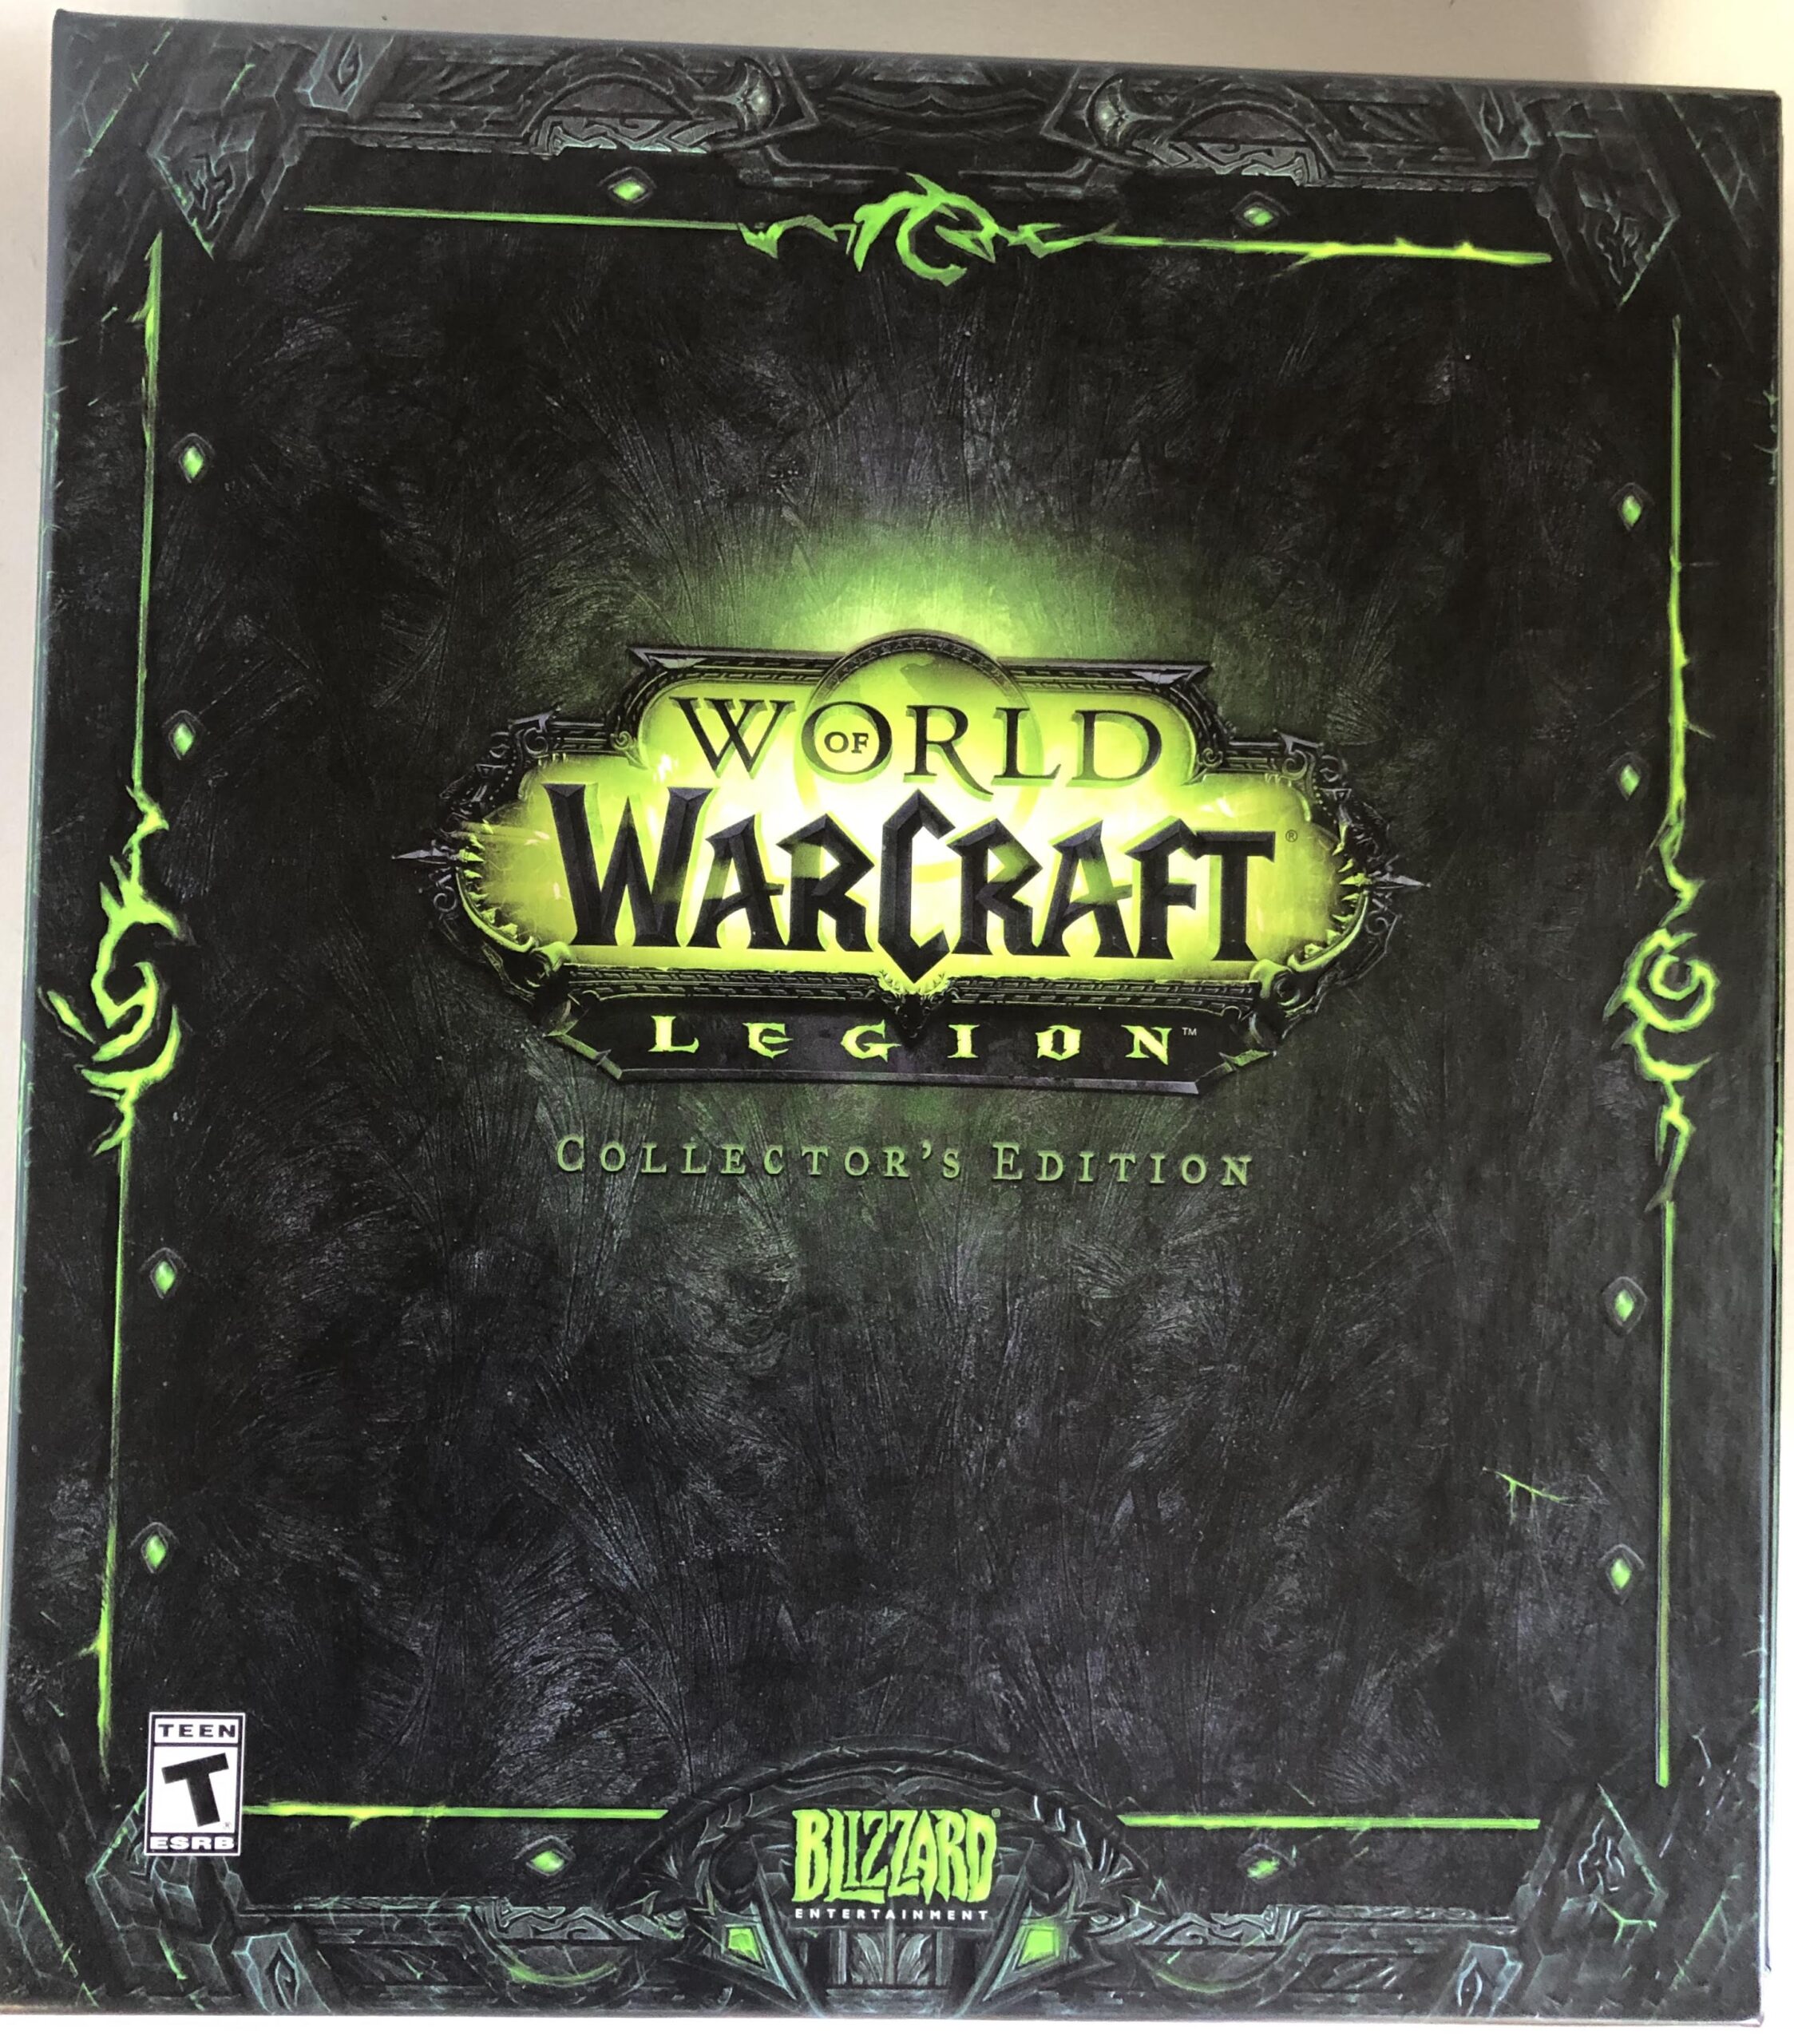 World of Warcraft Legion Collector's Edition – Stuff I'm Selling